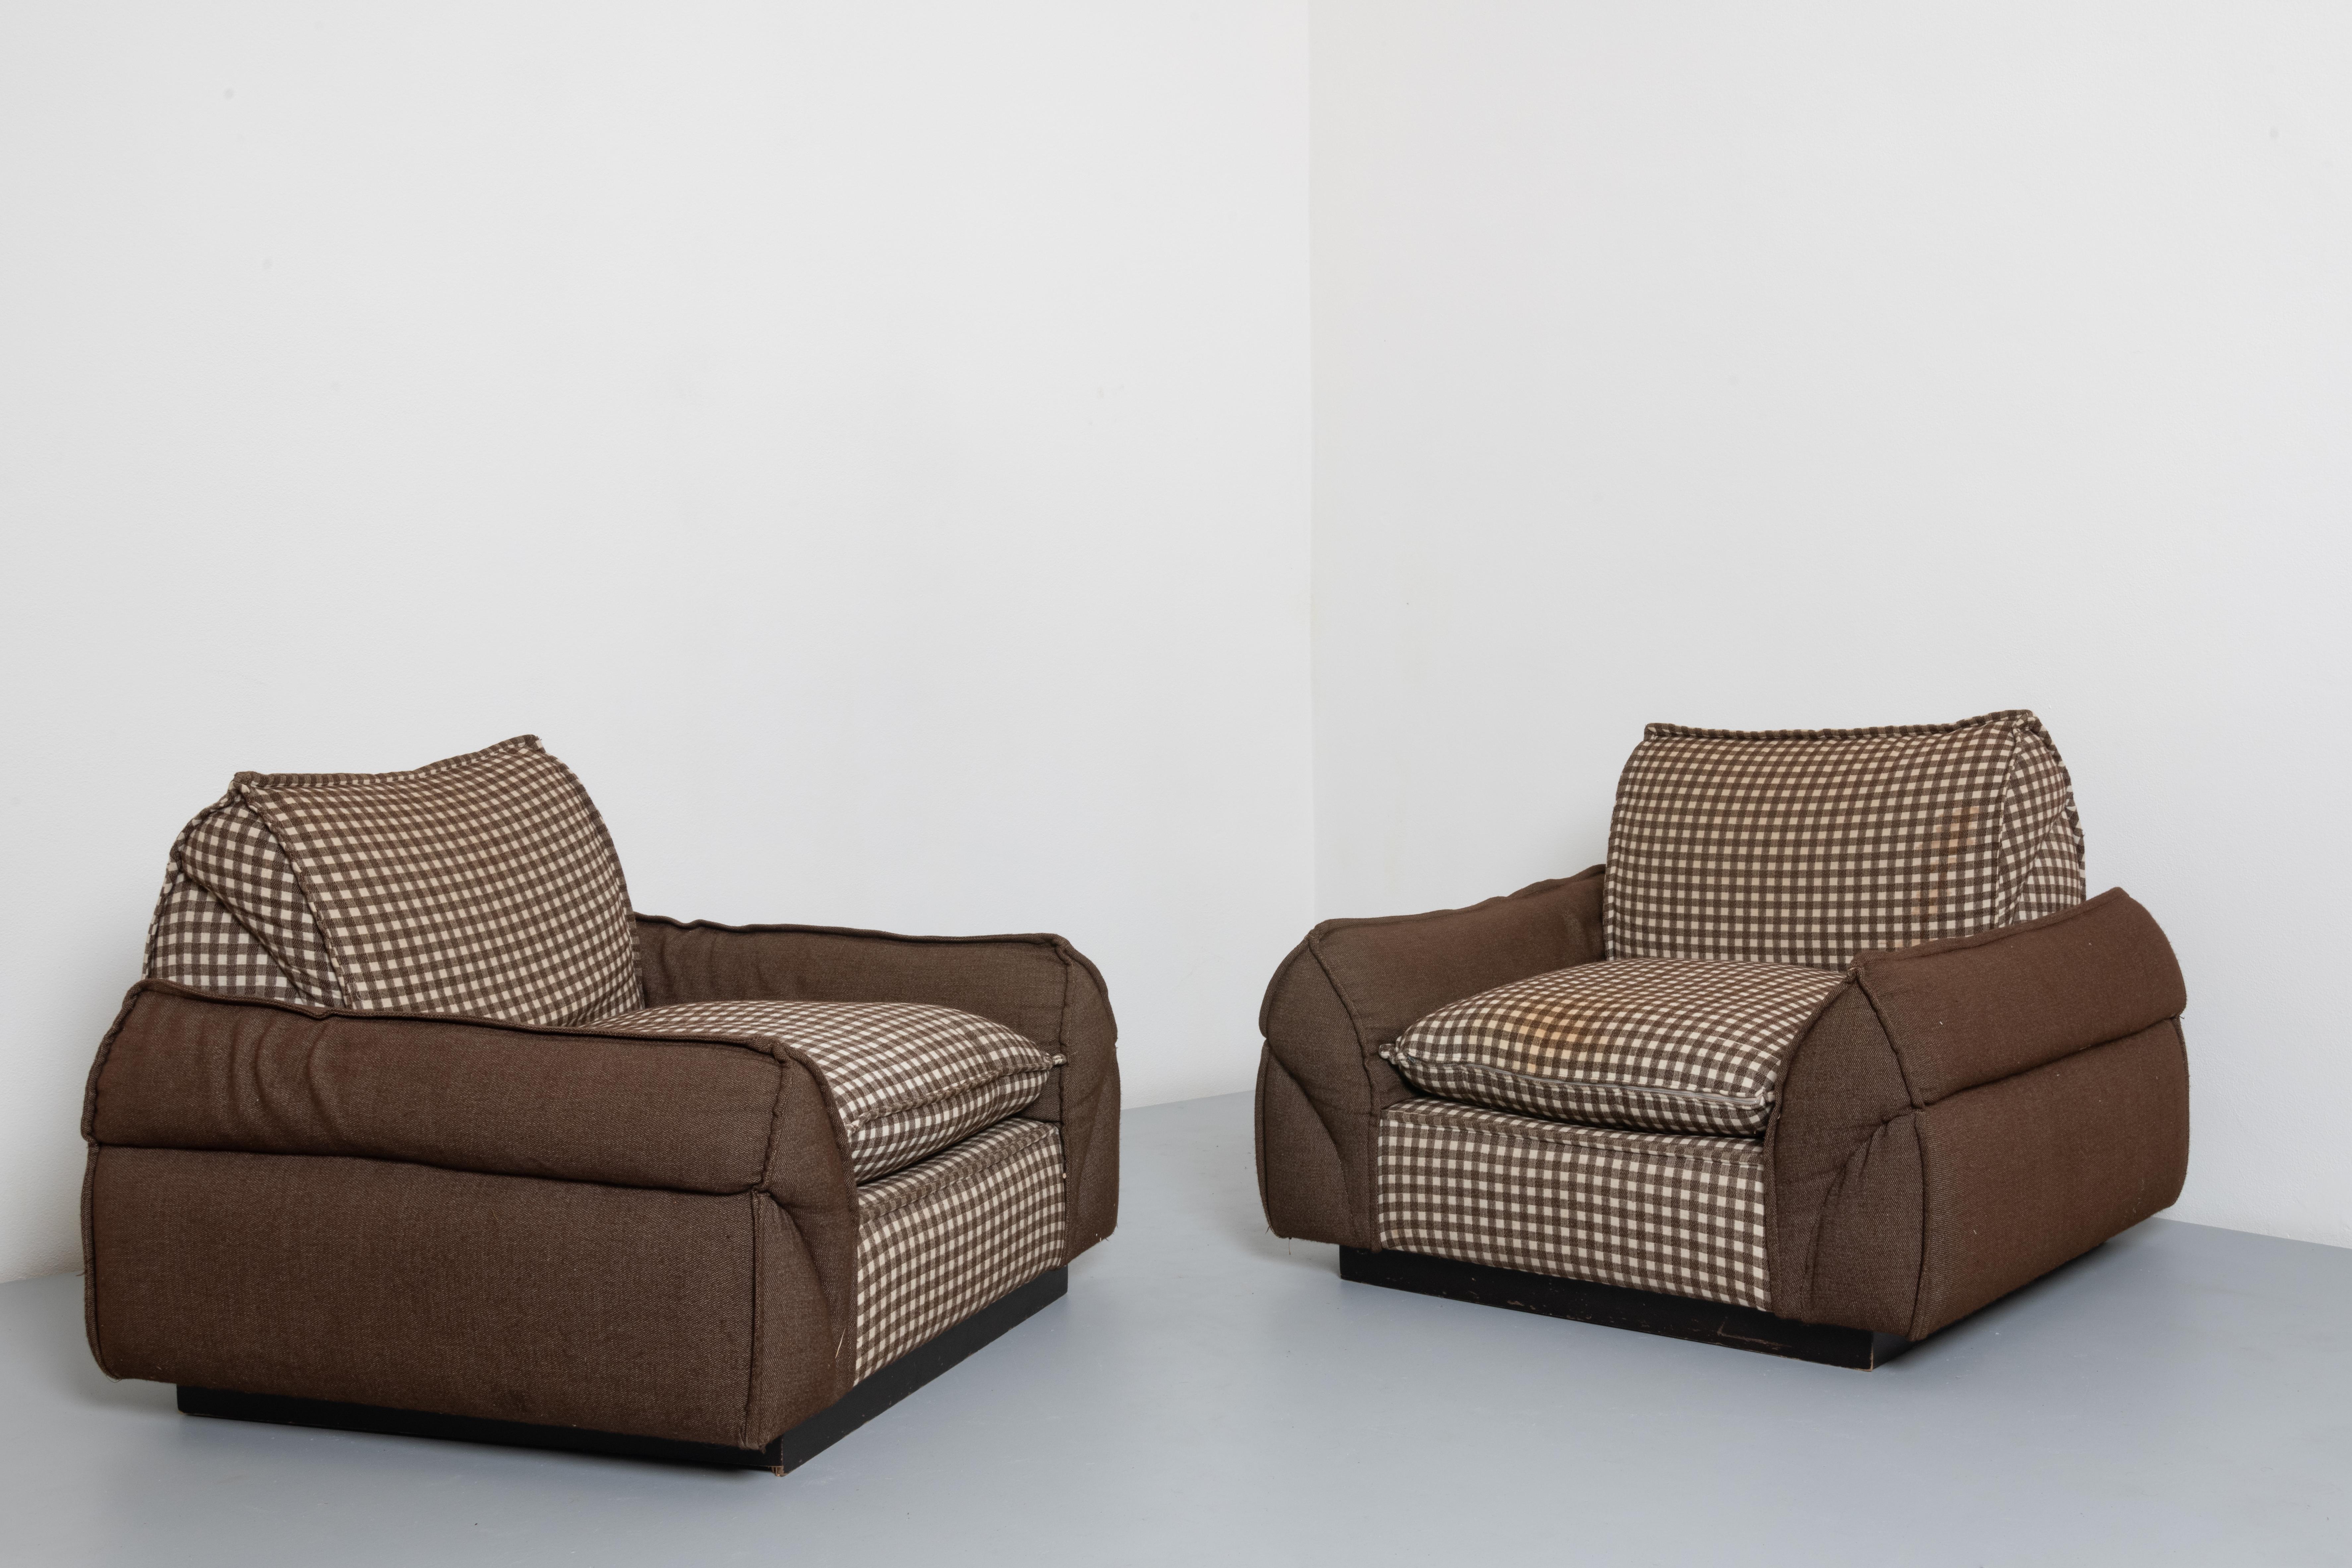 Italian Bulky Pair of Lounge Chairs in fabric.
These two armchairs can be adapted in a modern living room to provide comfort and a touch of style. They are comfortable and robust armchairs with a strong personality. The uniqueness of this model is